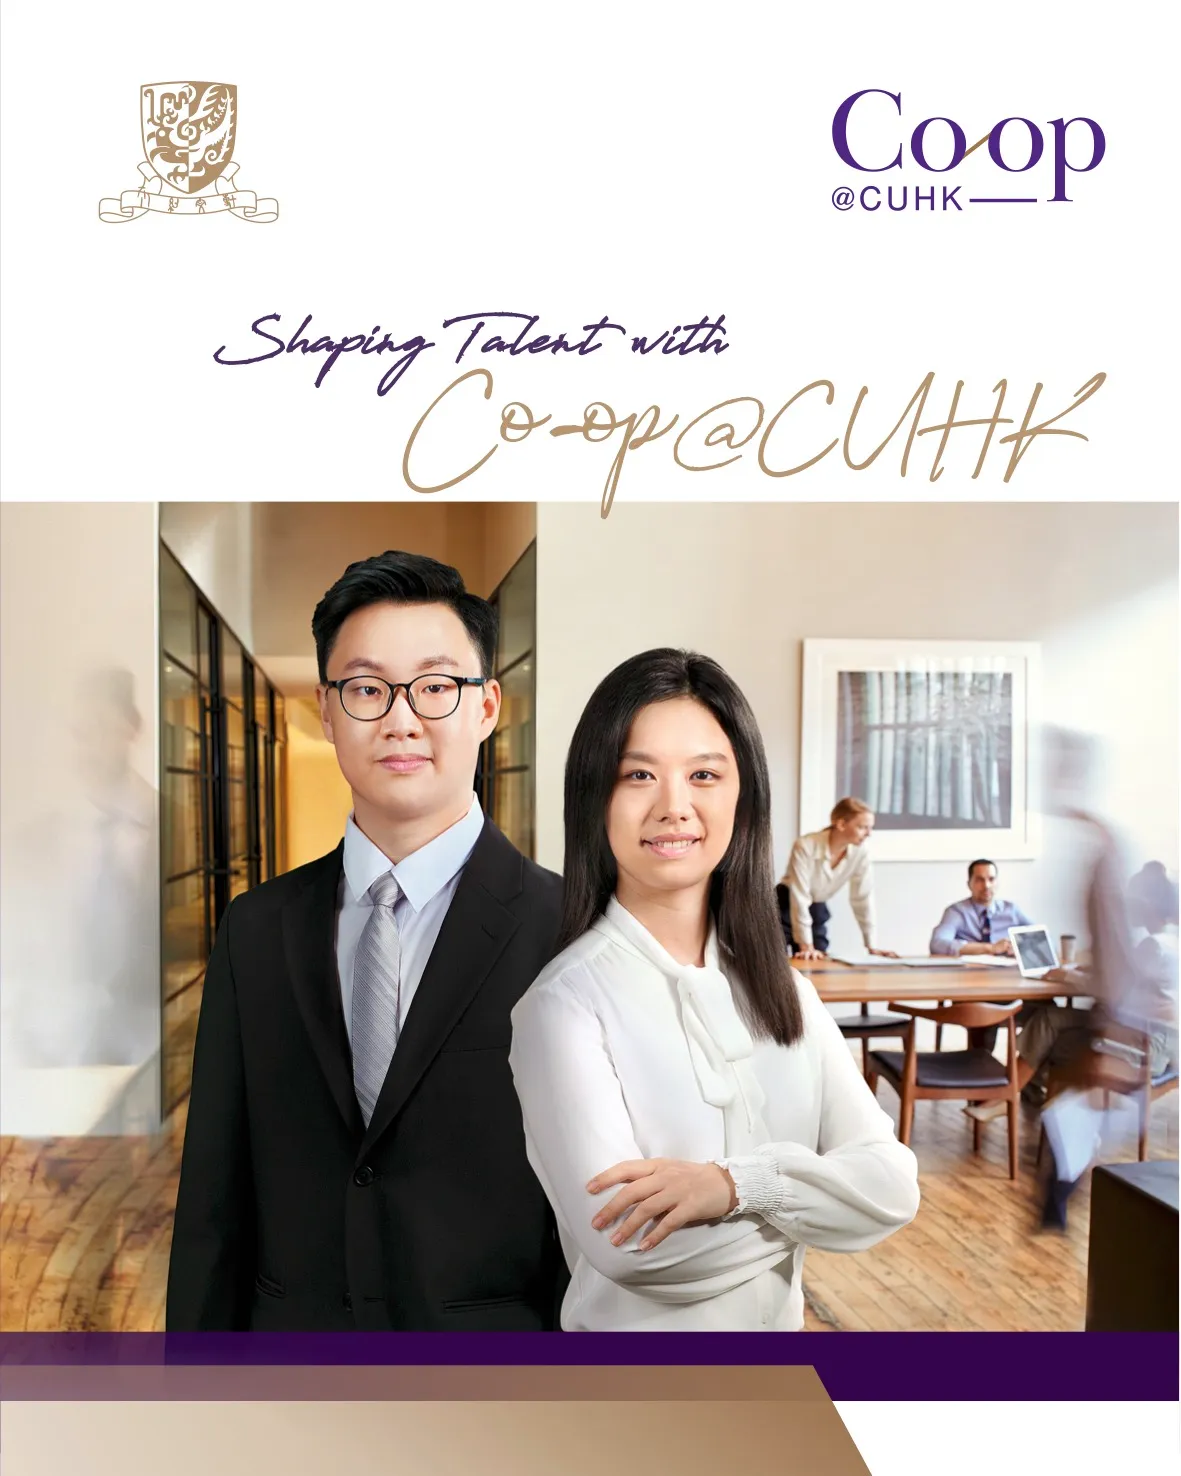 Cover of Co-op@CUHK's employer's brochure